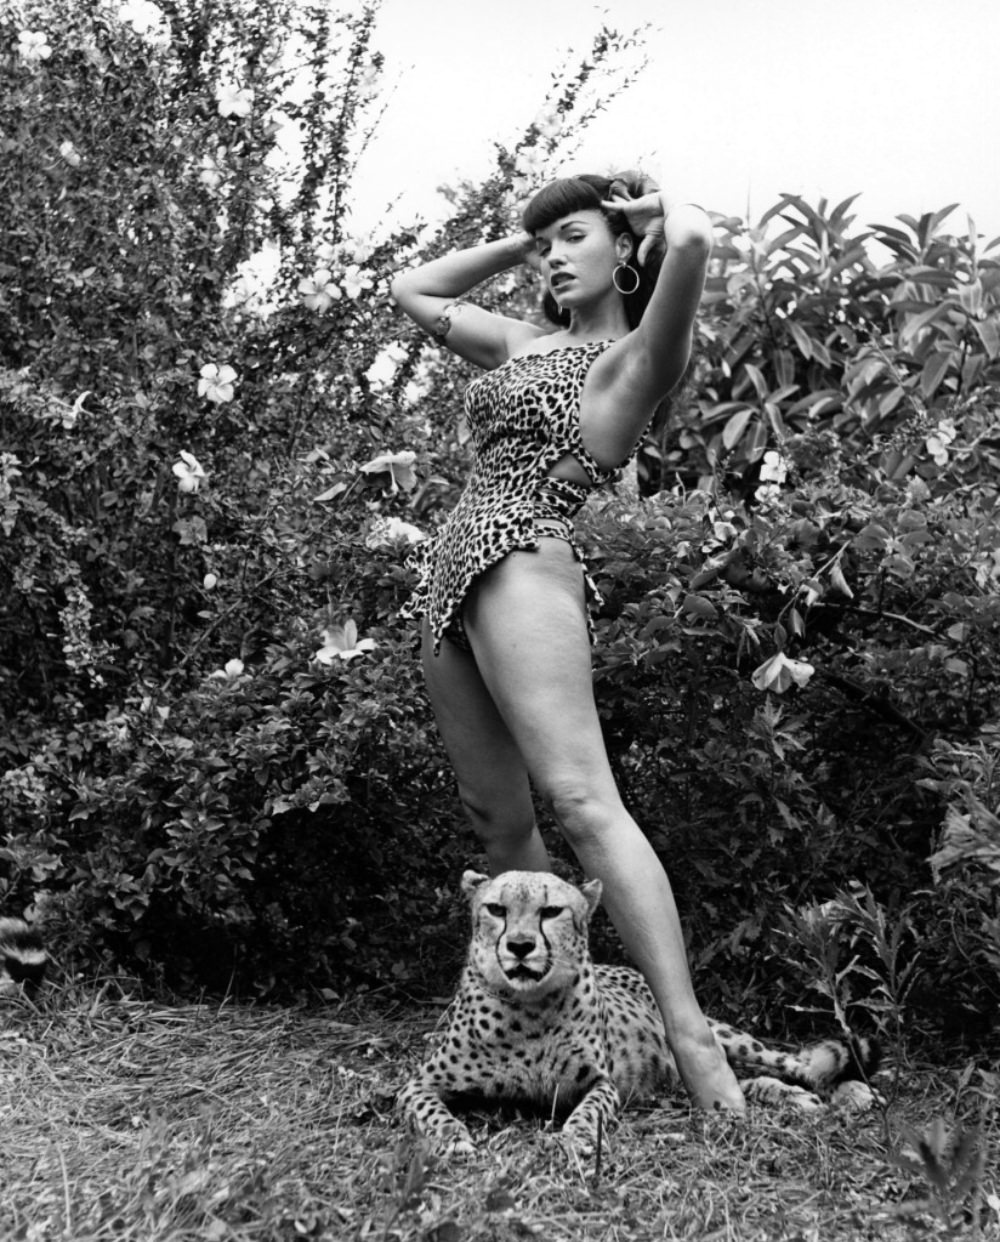 Stunning Pinup Photos of Bettie Page with the Cheetahs in 1954